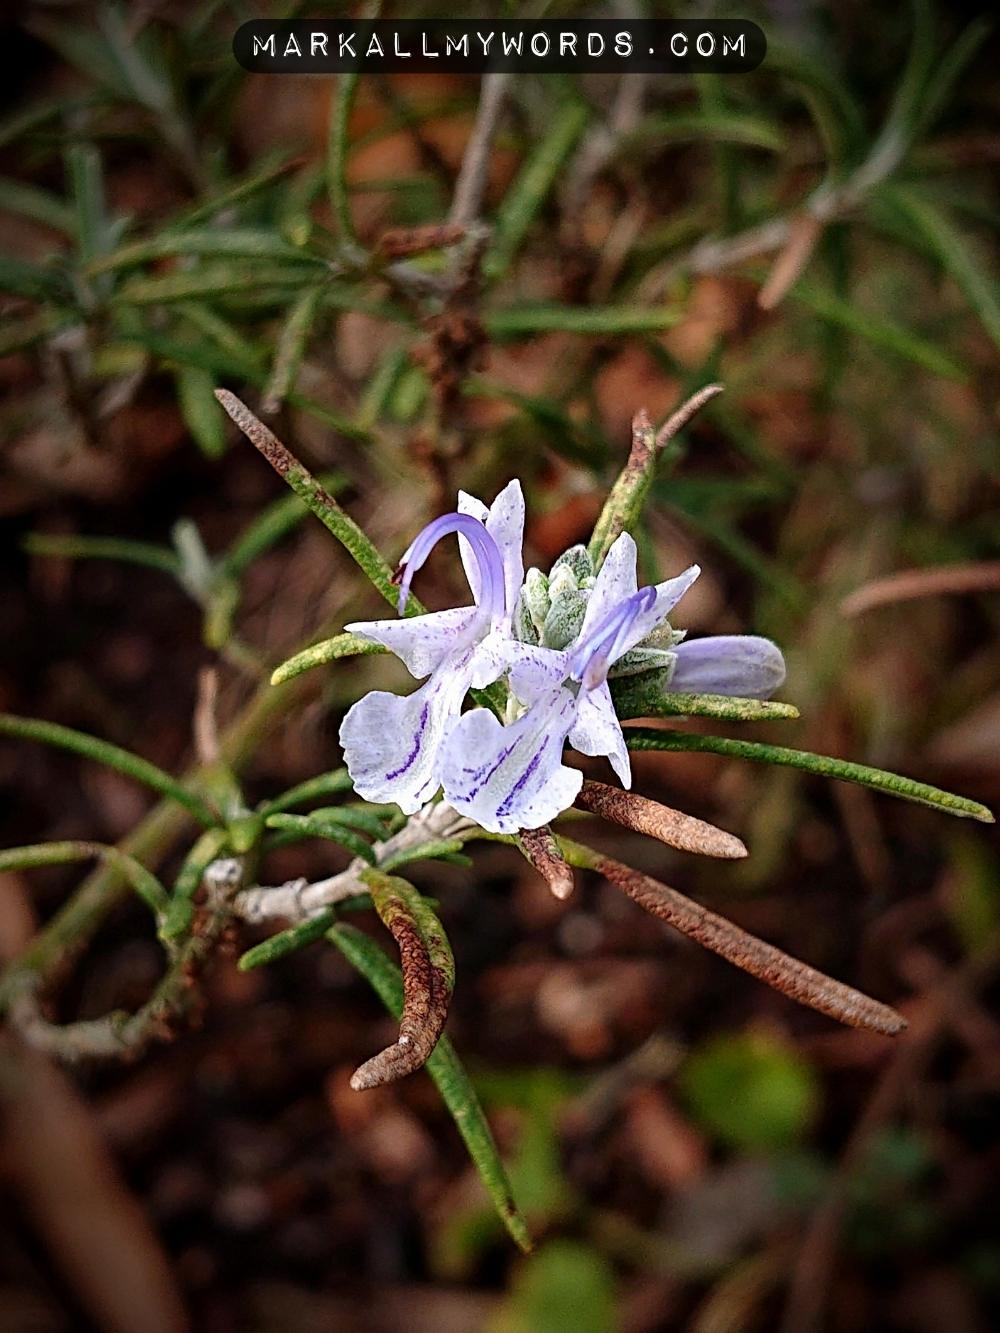 Rosemary flowers on a plant in winter